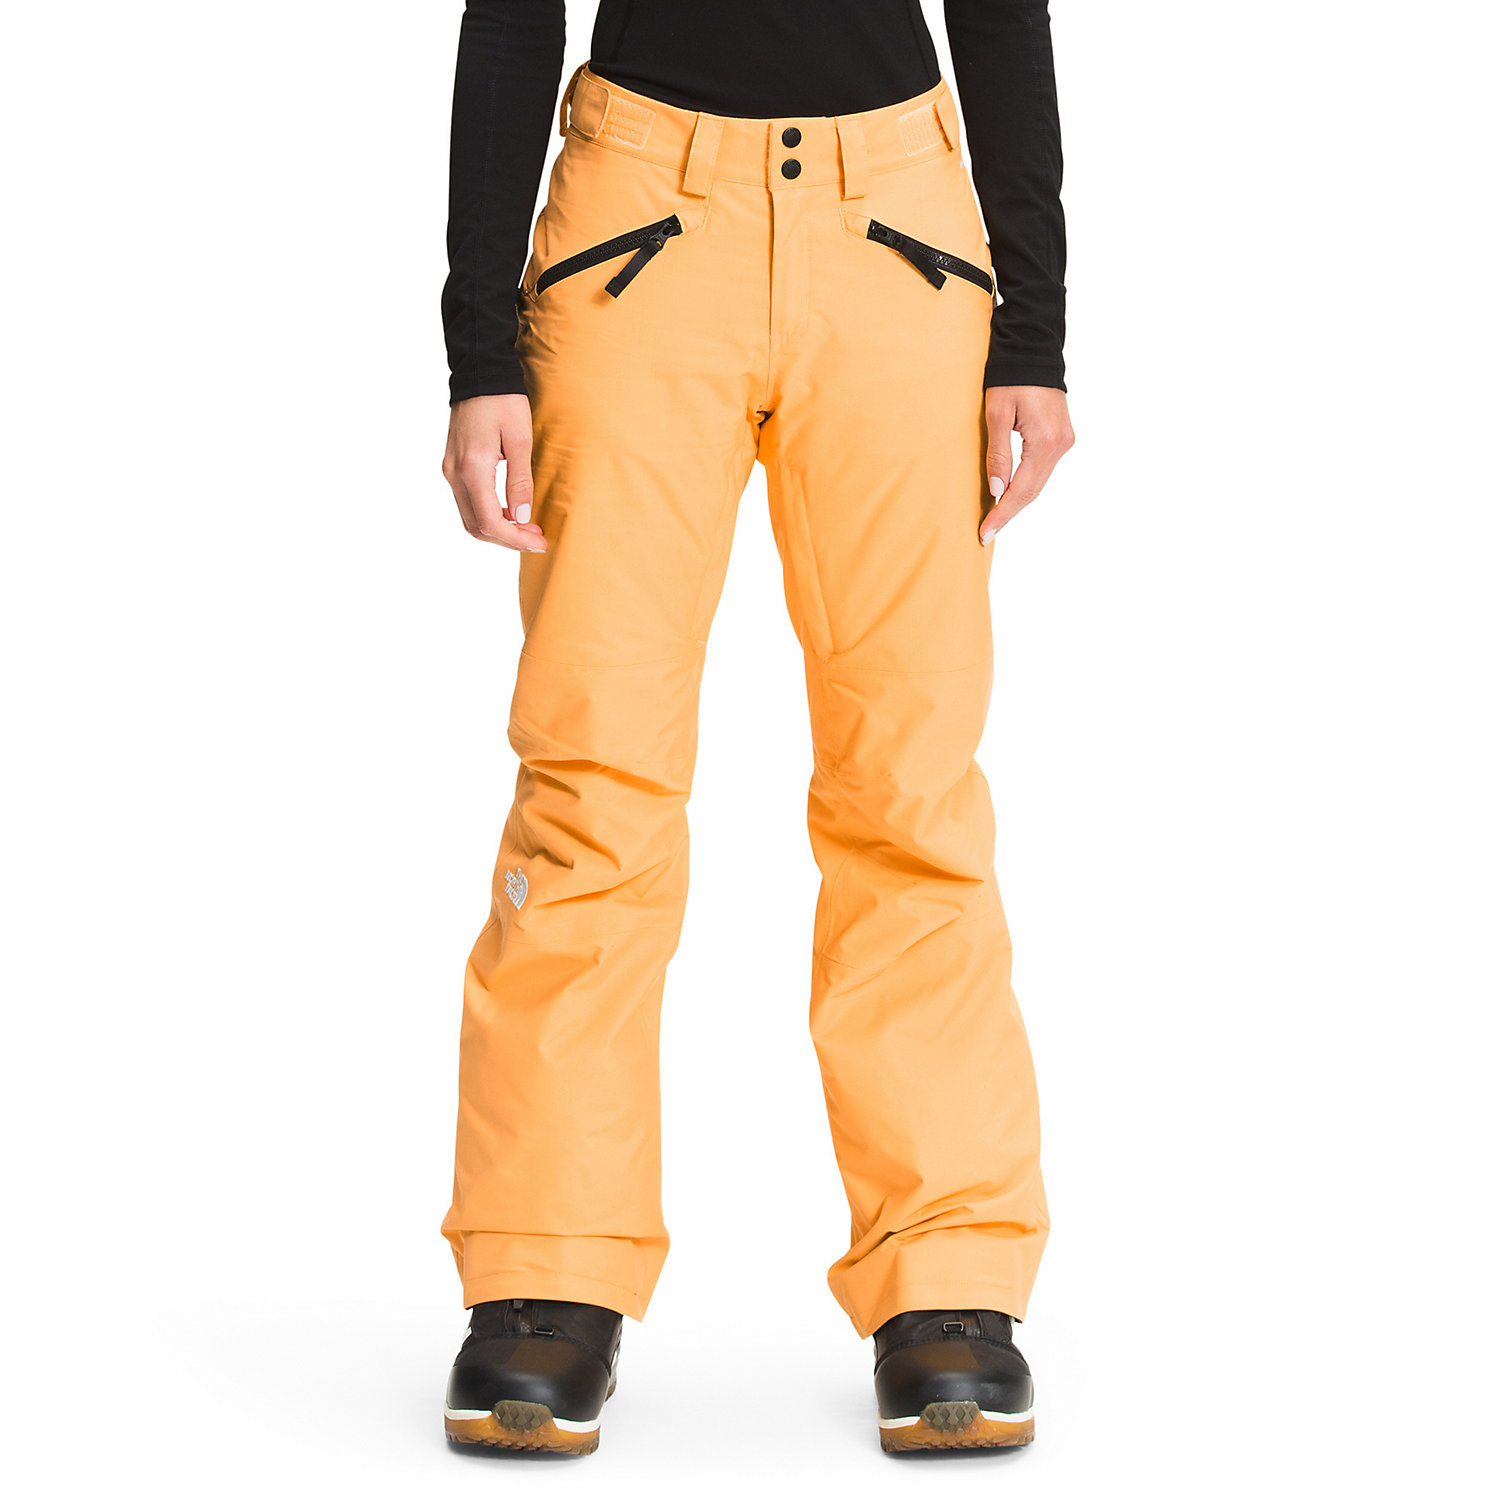 Under Armour Navigate Insulated Ski Snow Pants Women's M for sale online 